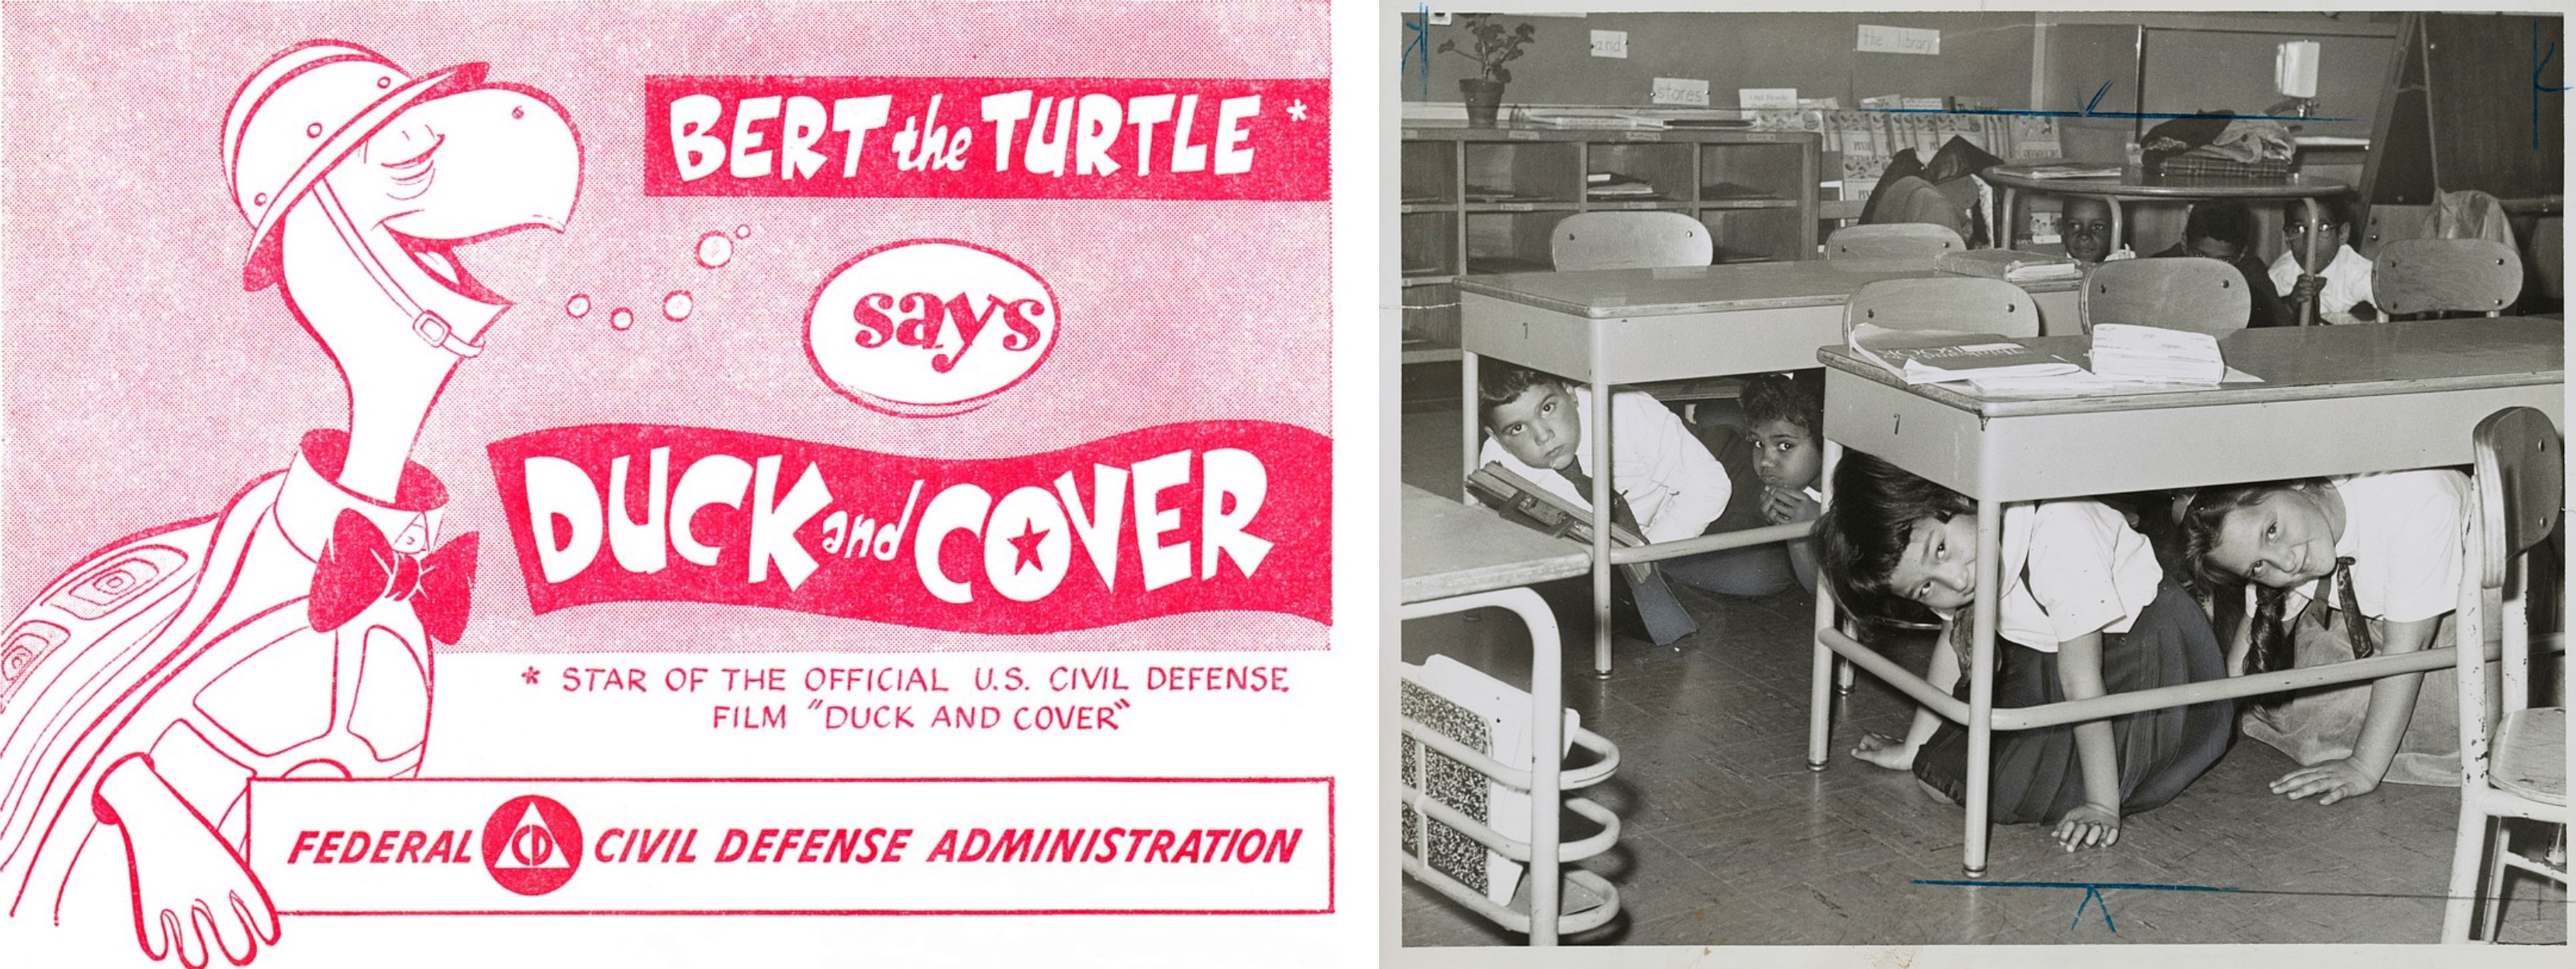 On the left, Bert the Turtle Says Duck and Cover. On the right,  school children practicing a "take cover" drill.